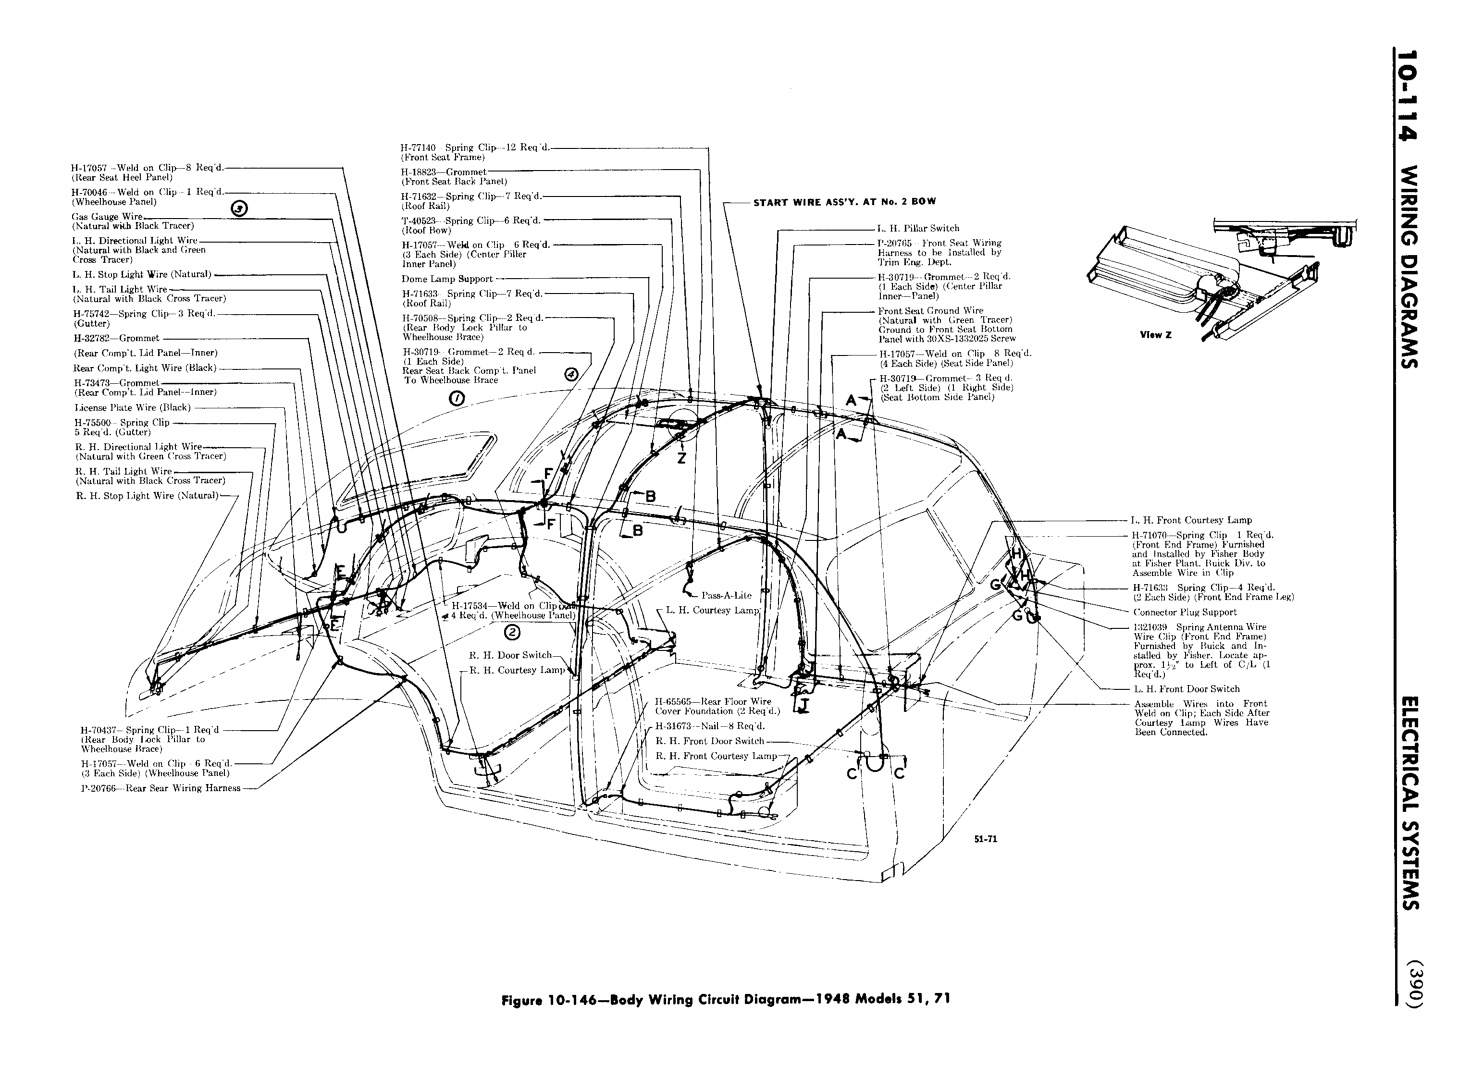 n_11 1948 Buick Shop Manual - Electrical Systems-114-114.jpg